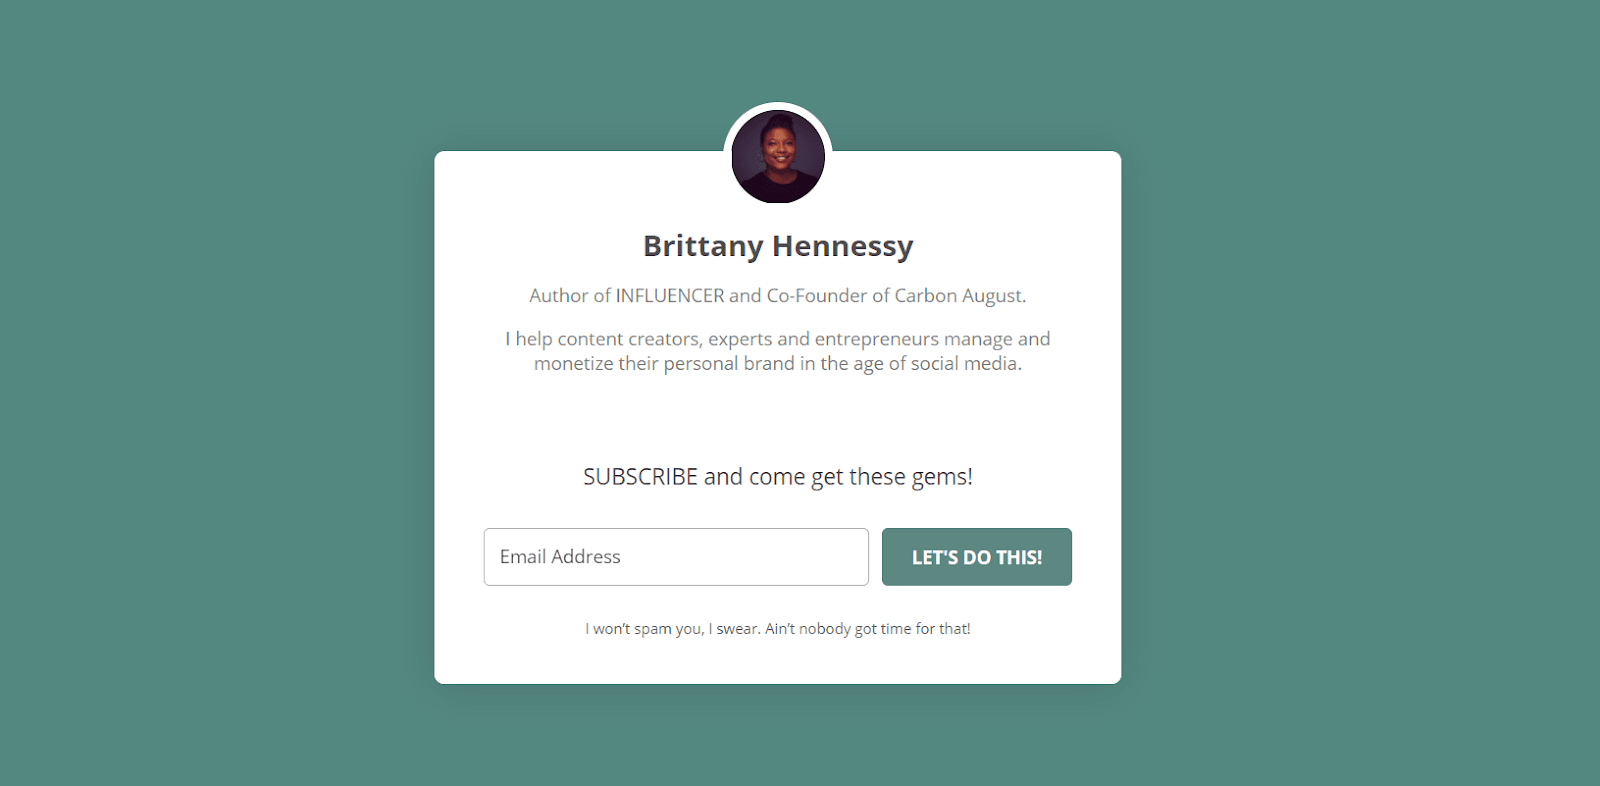 Landing page for Brittany Hennessy